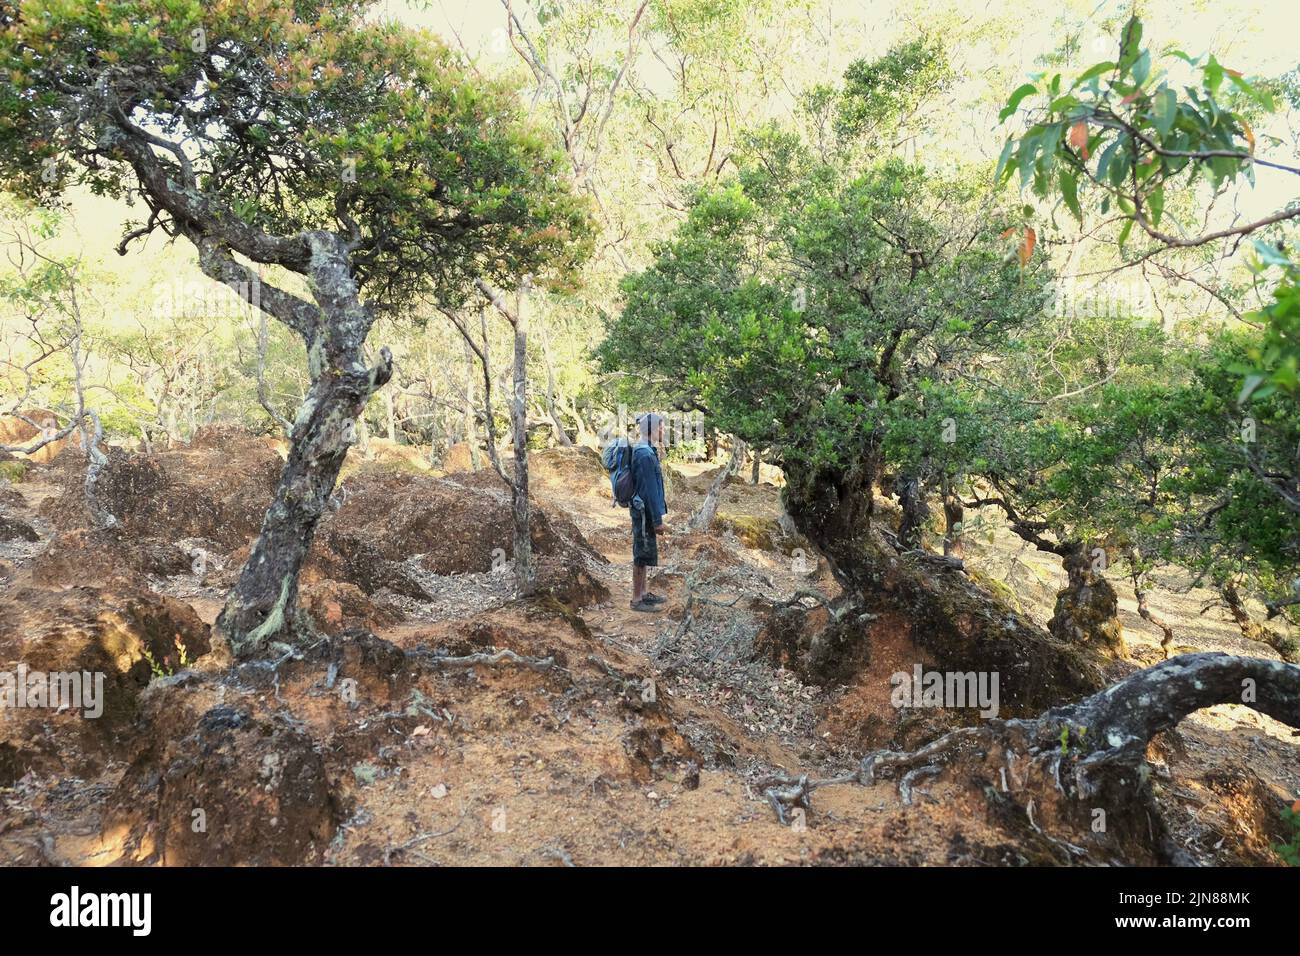 Samuel Sabneno, a villager and a part time ecotourism guide, standing in the middle of mountain vegetation on a forest near Fatumnasi village in South Central Timor, East Nusa Tenggara, Indonesia. Stock Photo